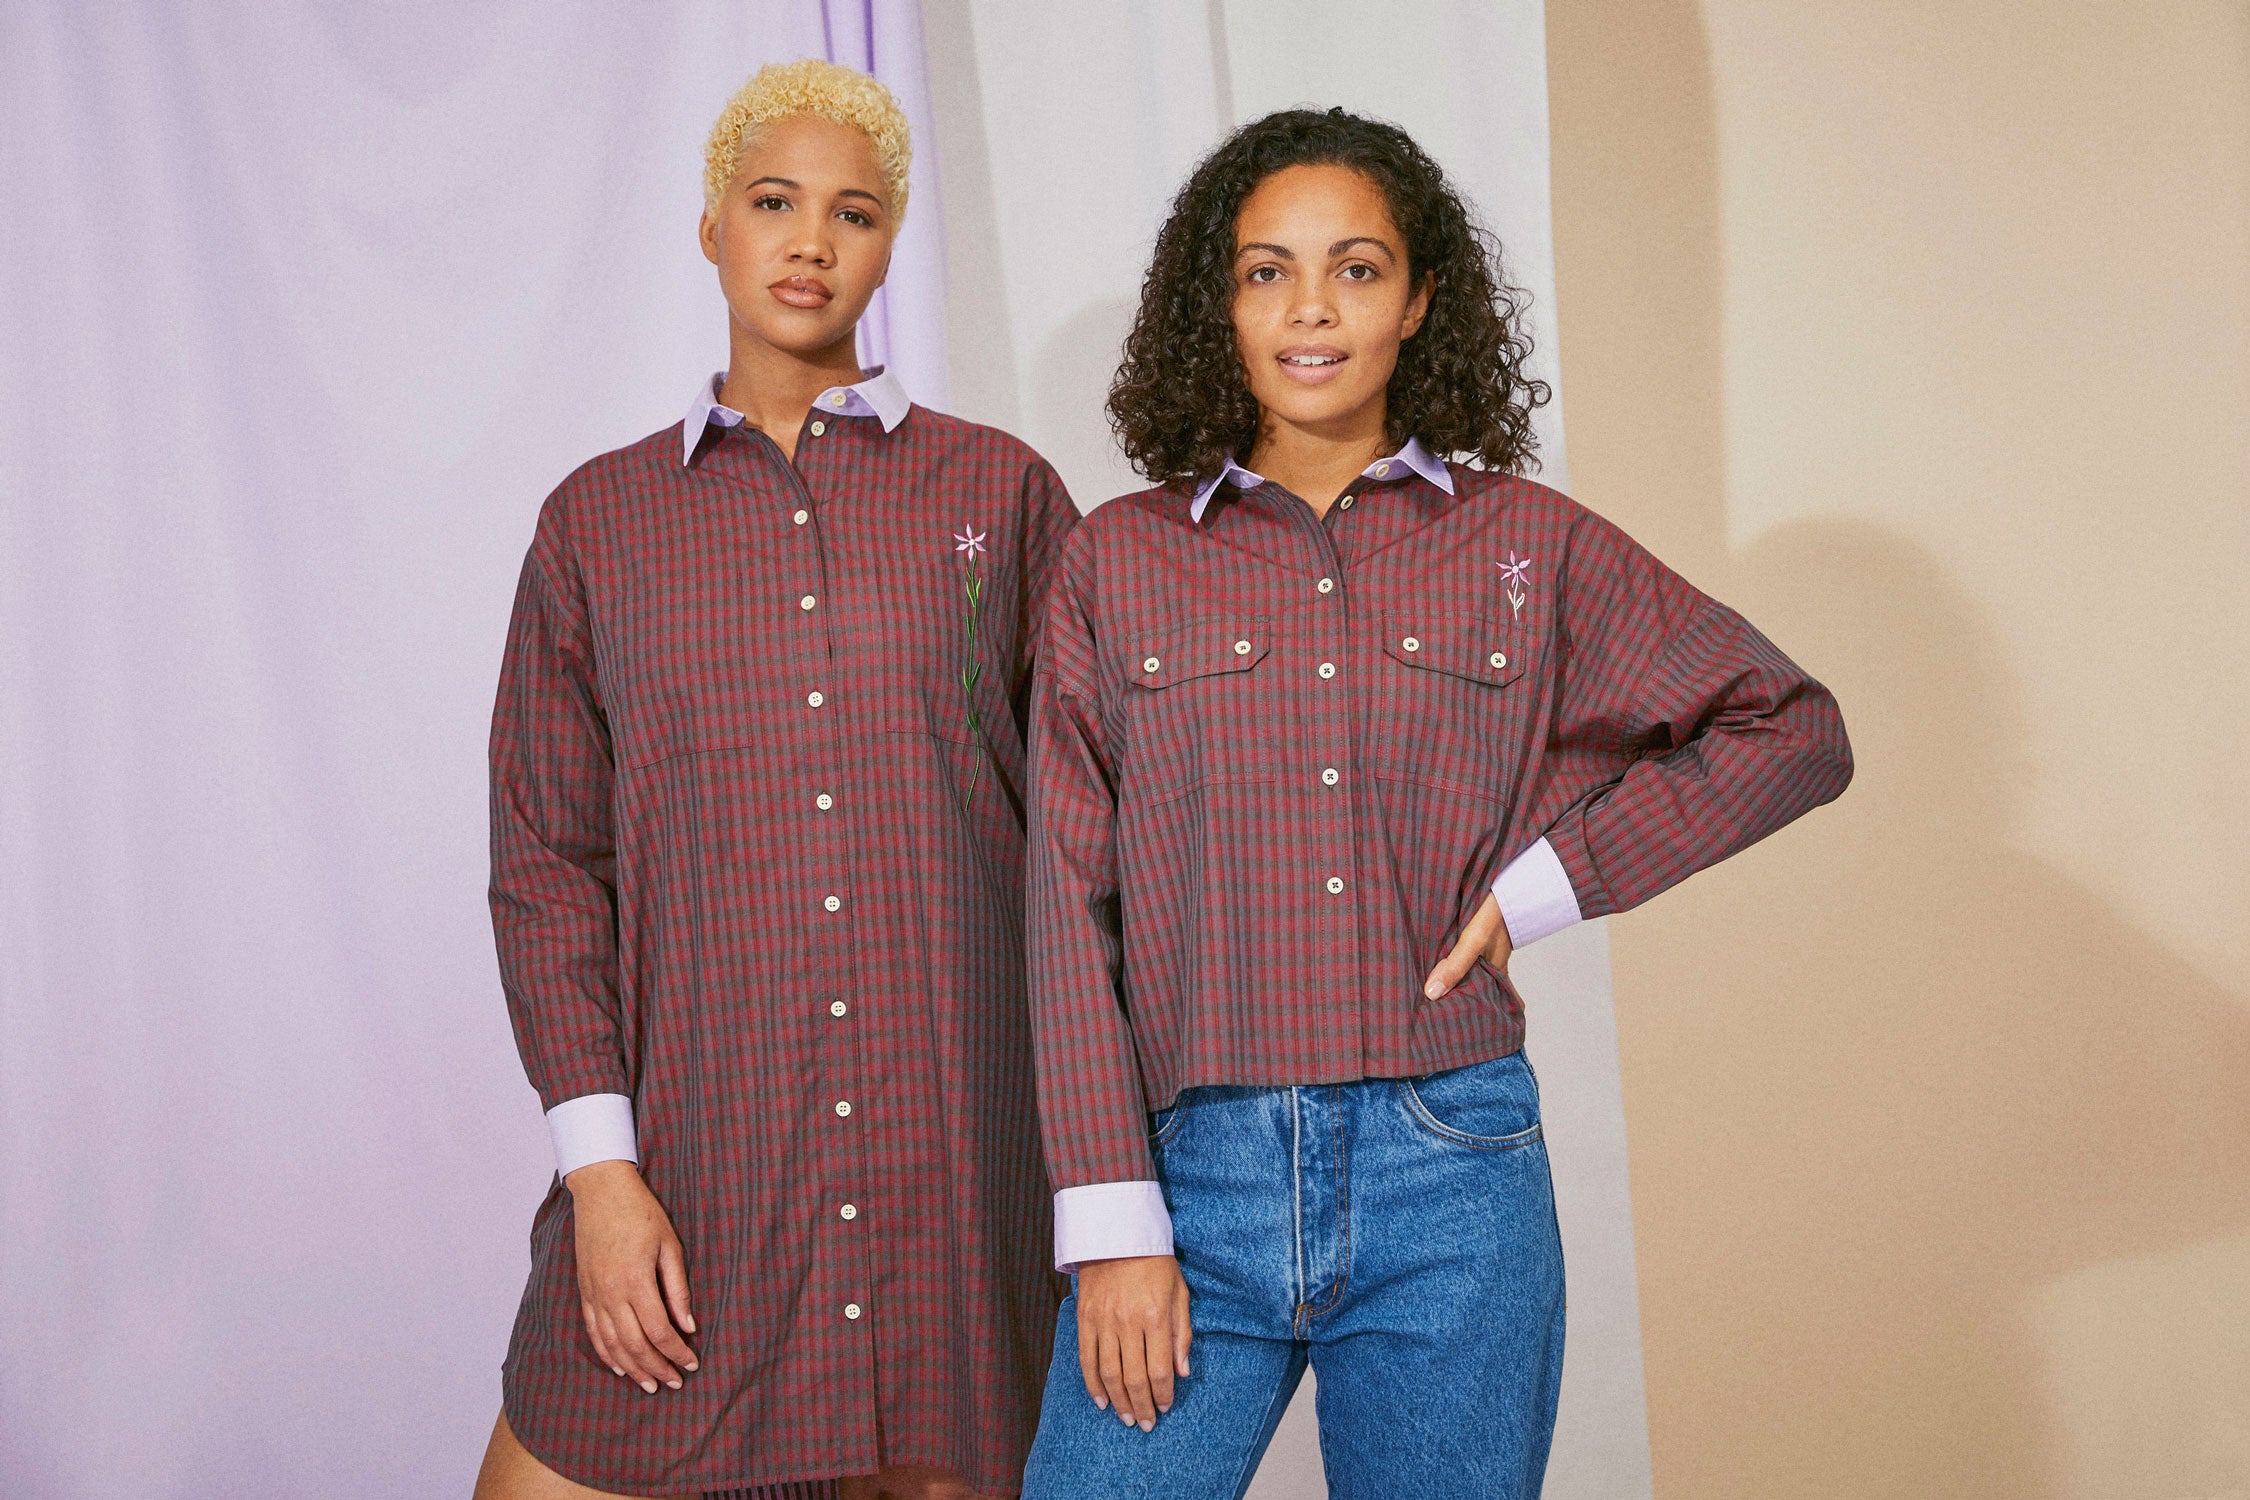 Two model stand side by side. The woman on the left wears Saywood's red check Etta Oversized Shirtdress. The woman on the right wears the Jules red check utility shirt, worn with jeans.